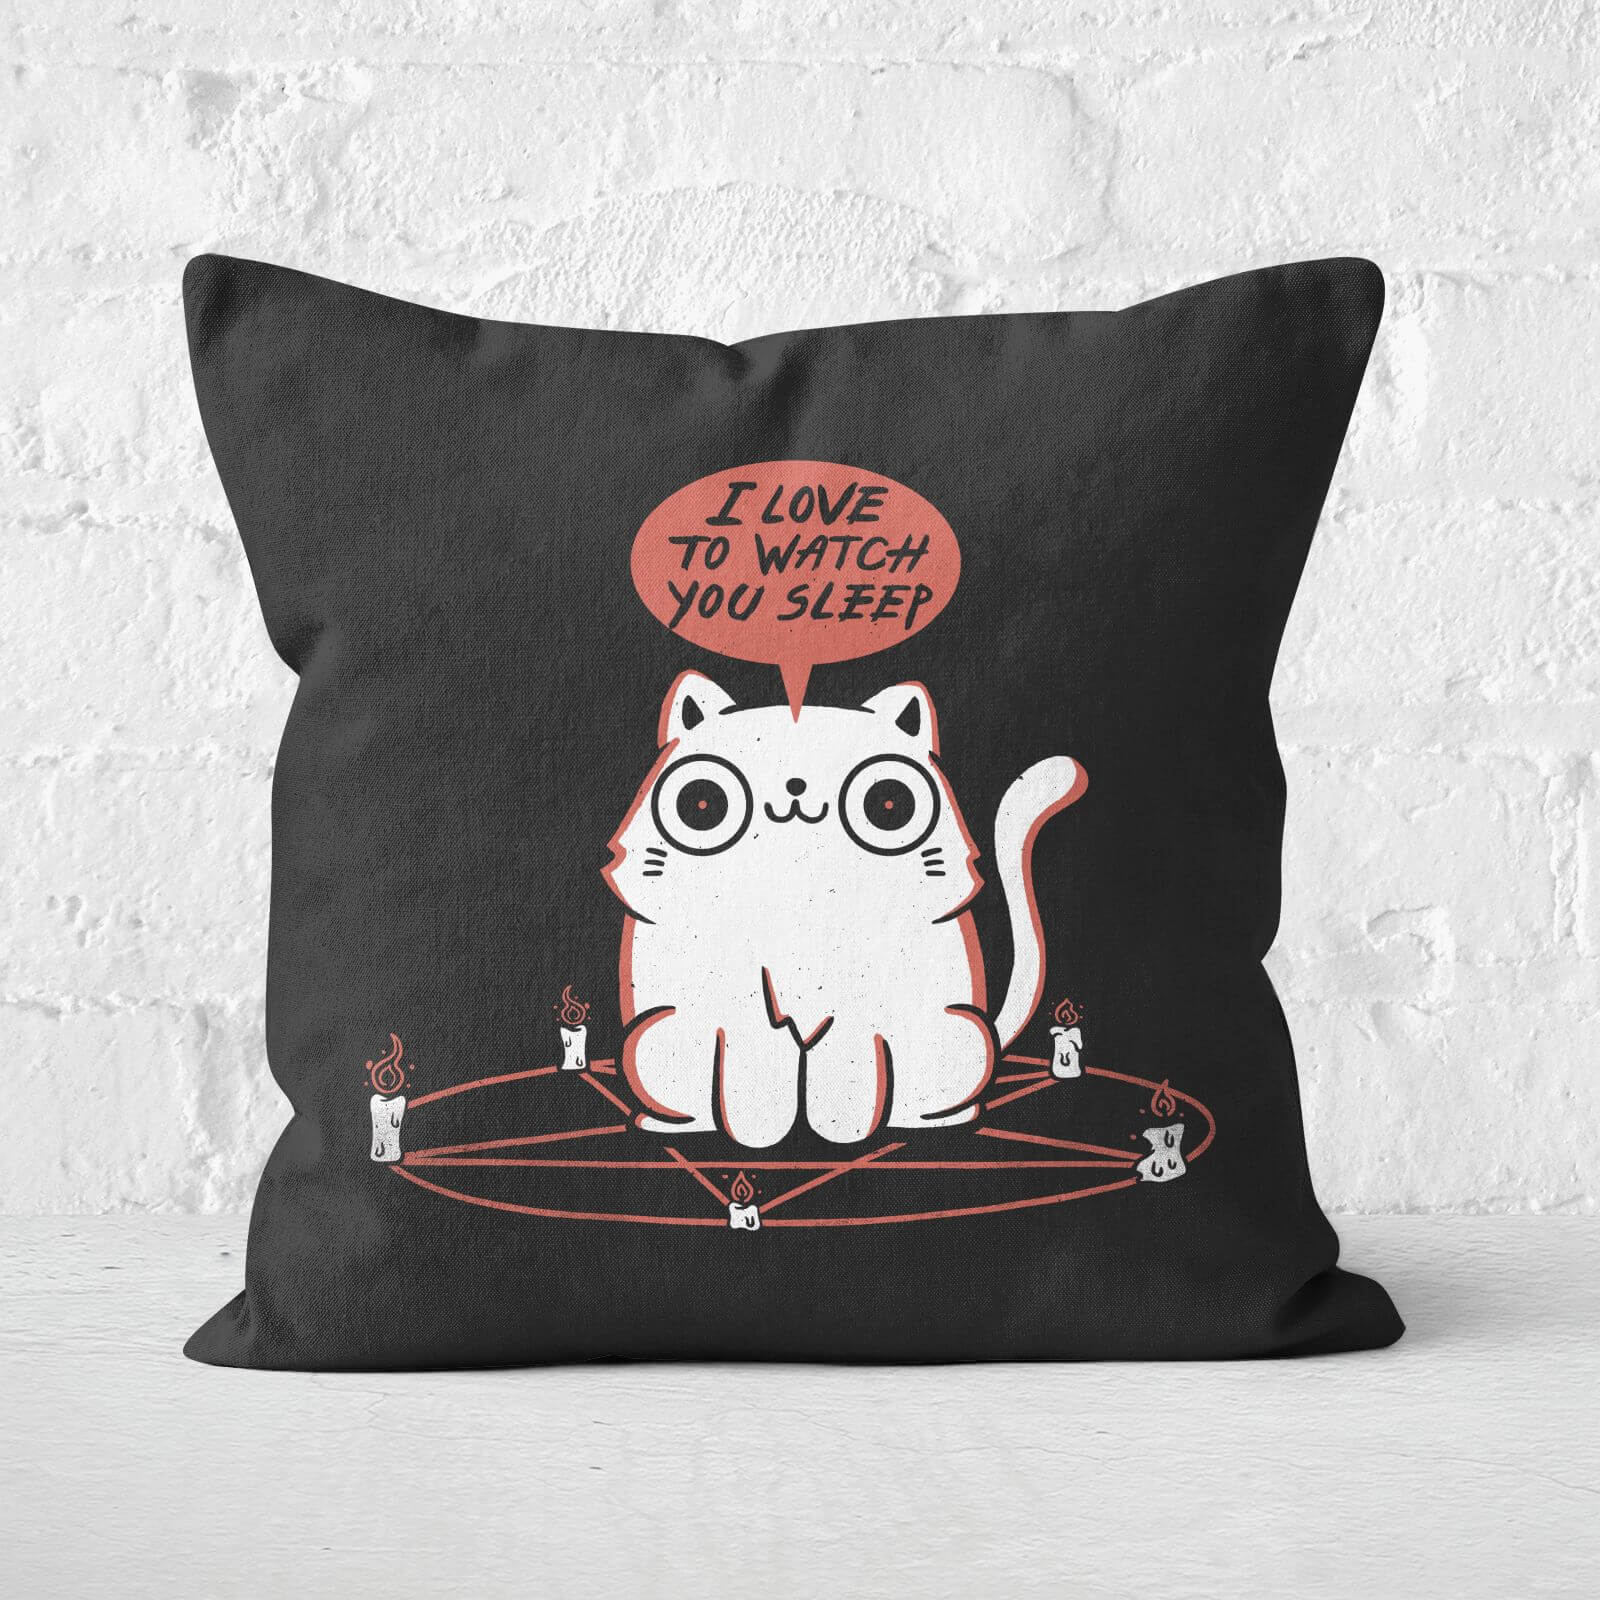 I Love To Watch You Sleep Square Cushion - 60x60cm - Soft Touch